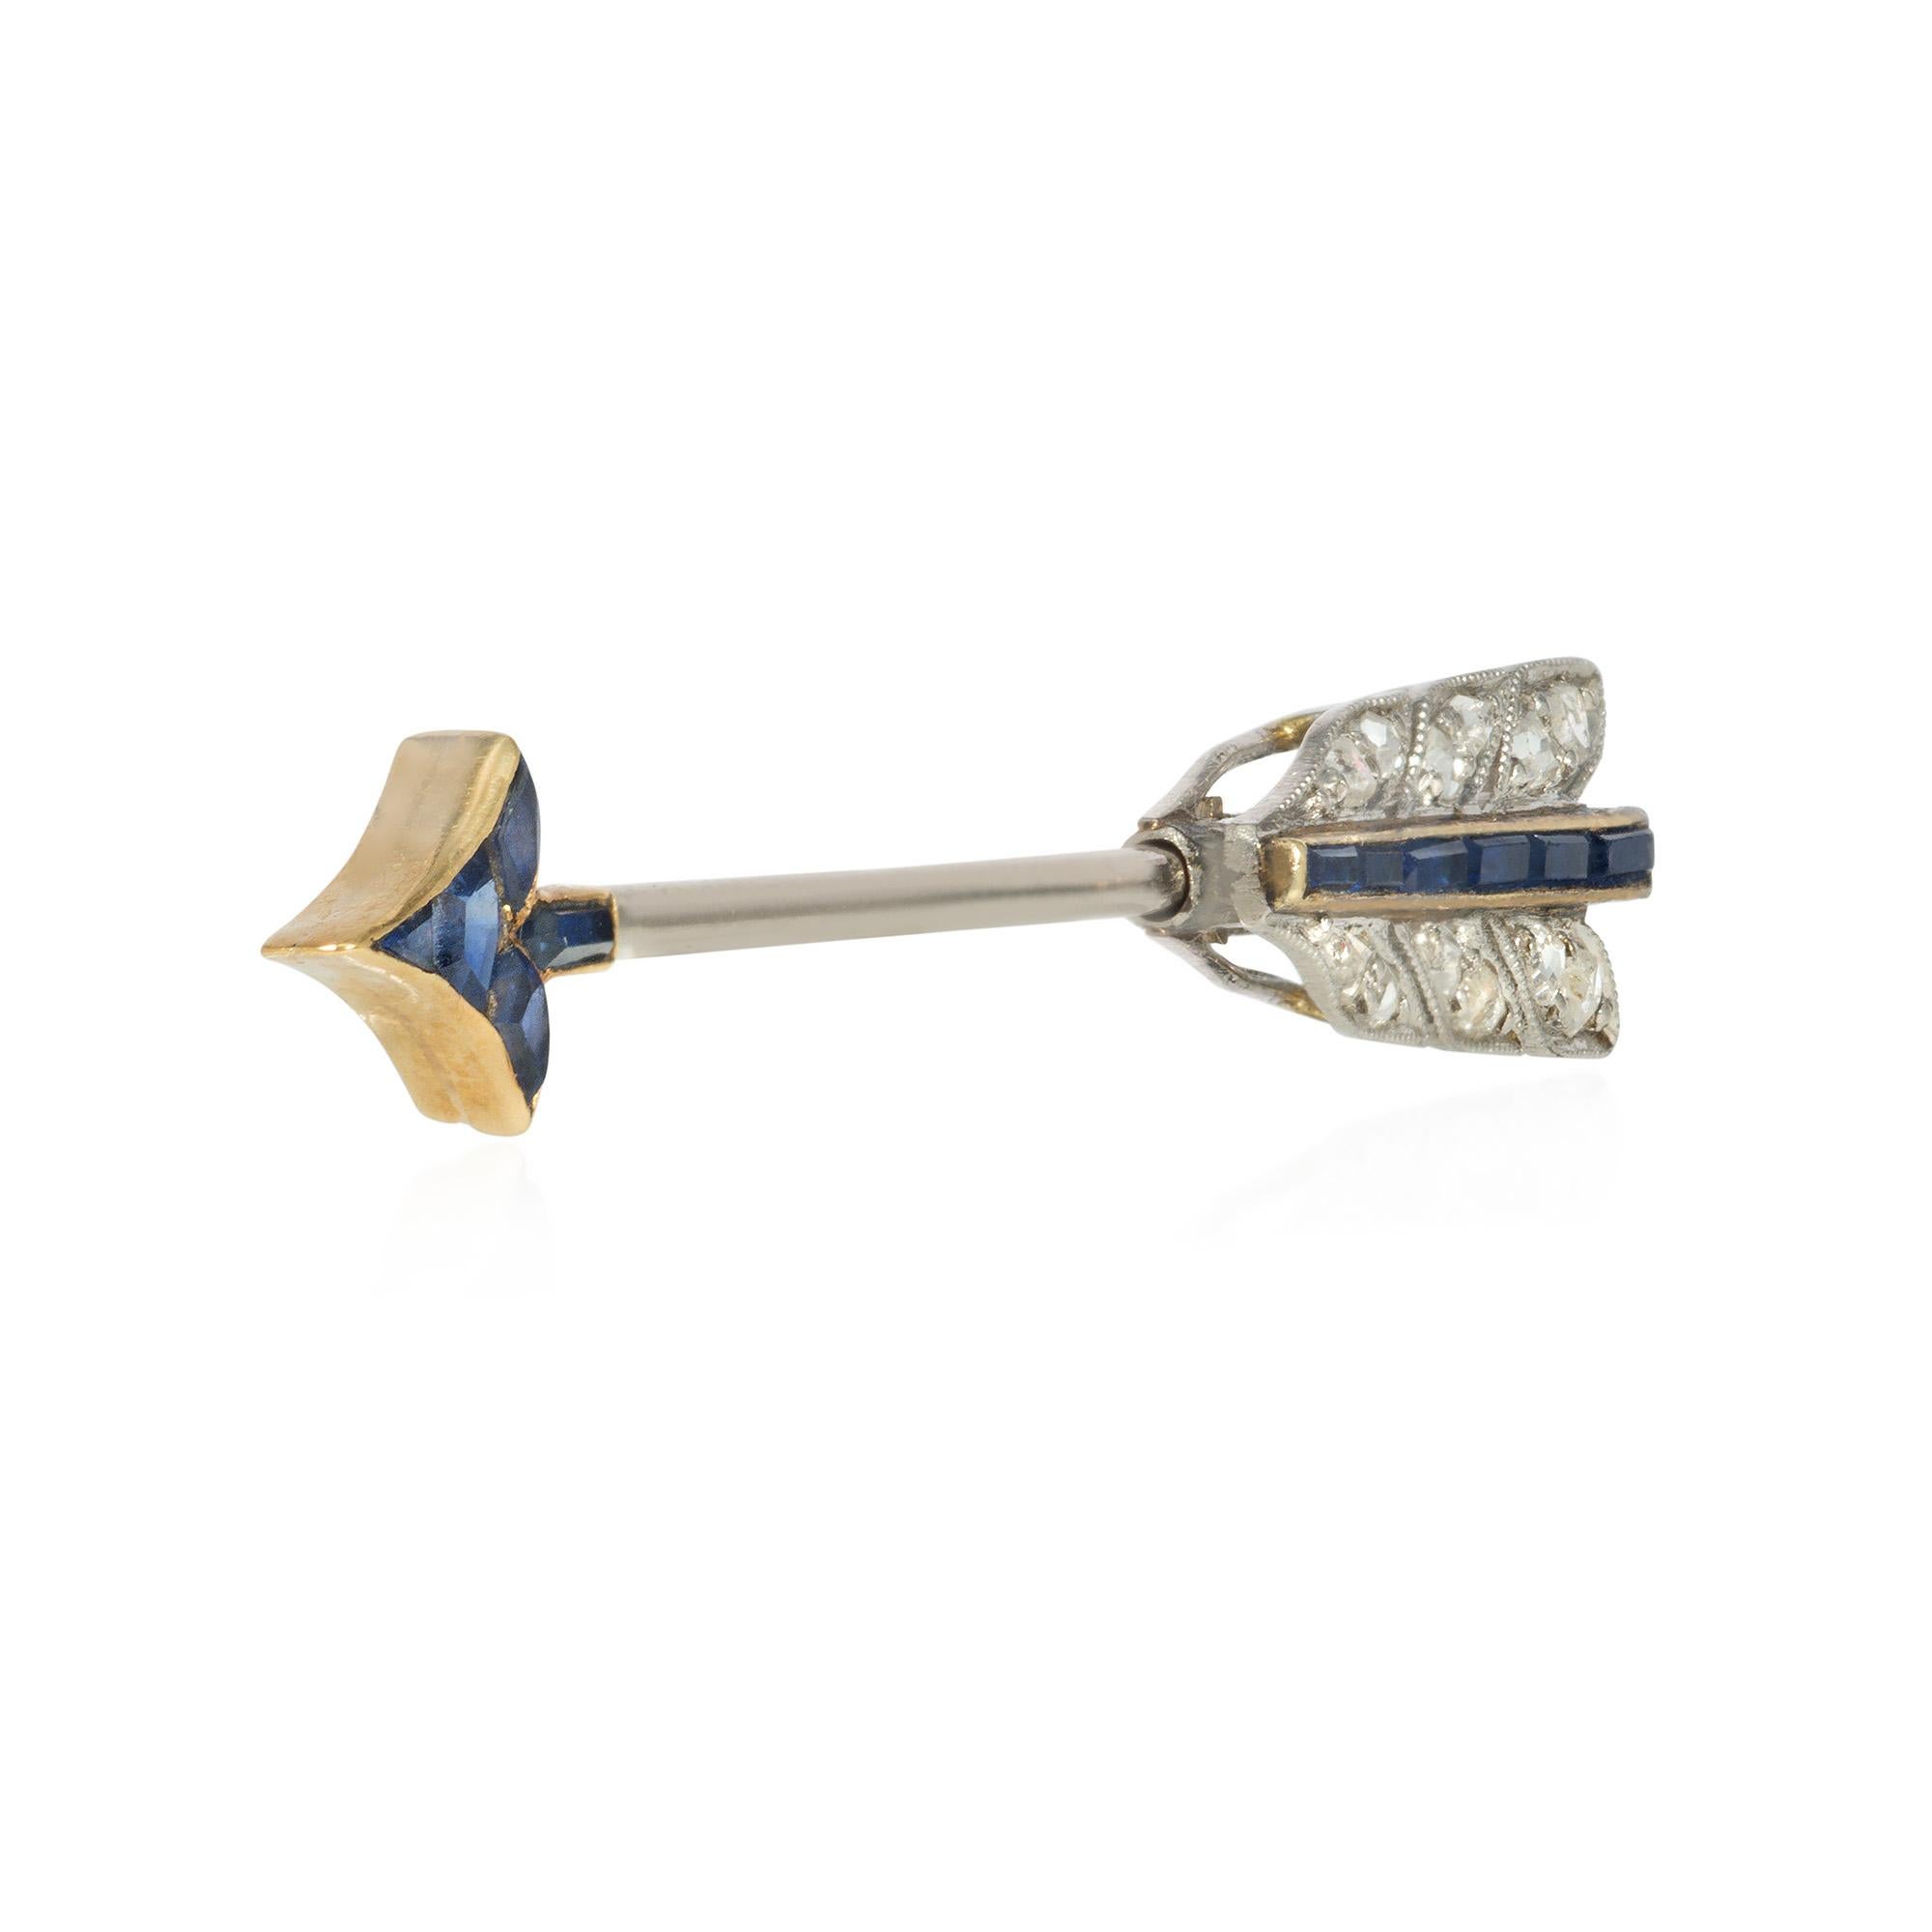 An Art Deco diamond and calibre sapphire jabot brooch in the form of an arrow, in platinum and 18k gold.  Cartier #9.L7735, original box.

The delicate scale allows this to serve as an attractive but not overly dressy accent on a lapel or